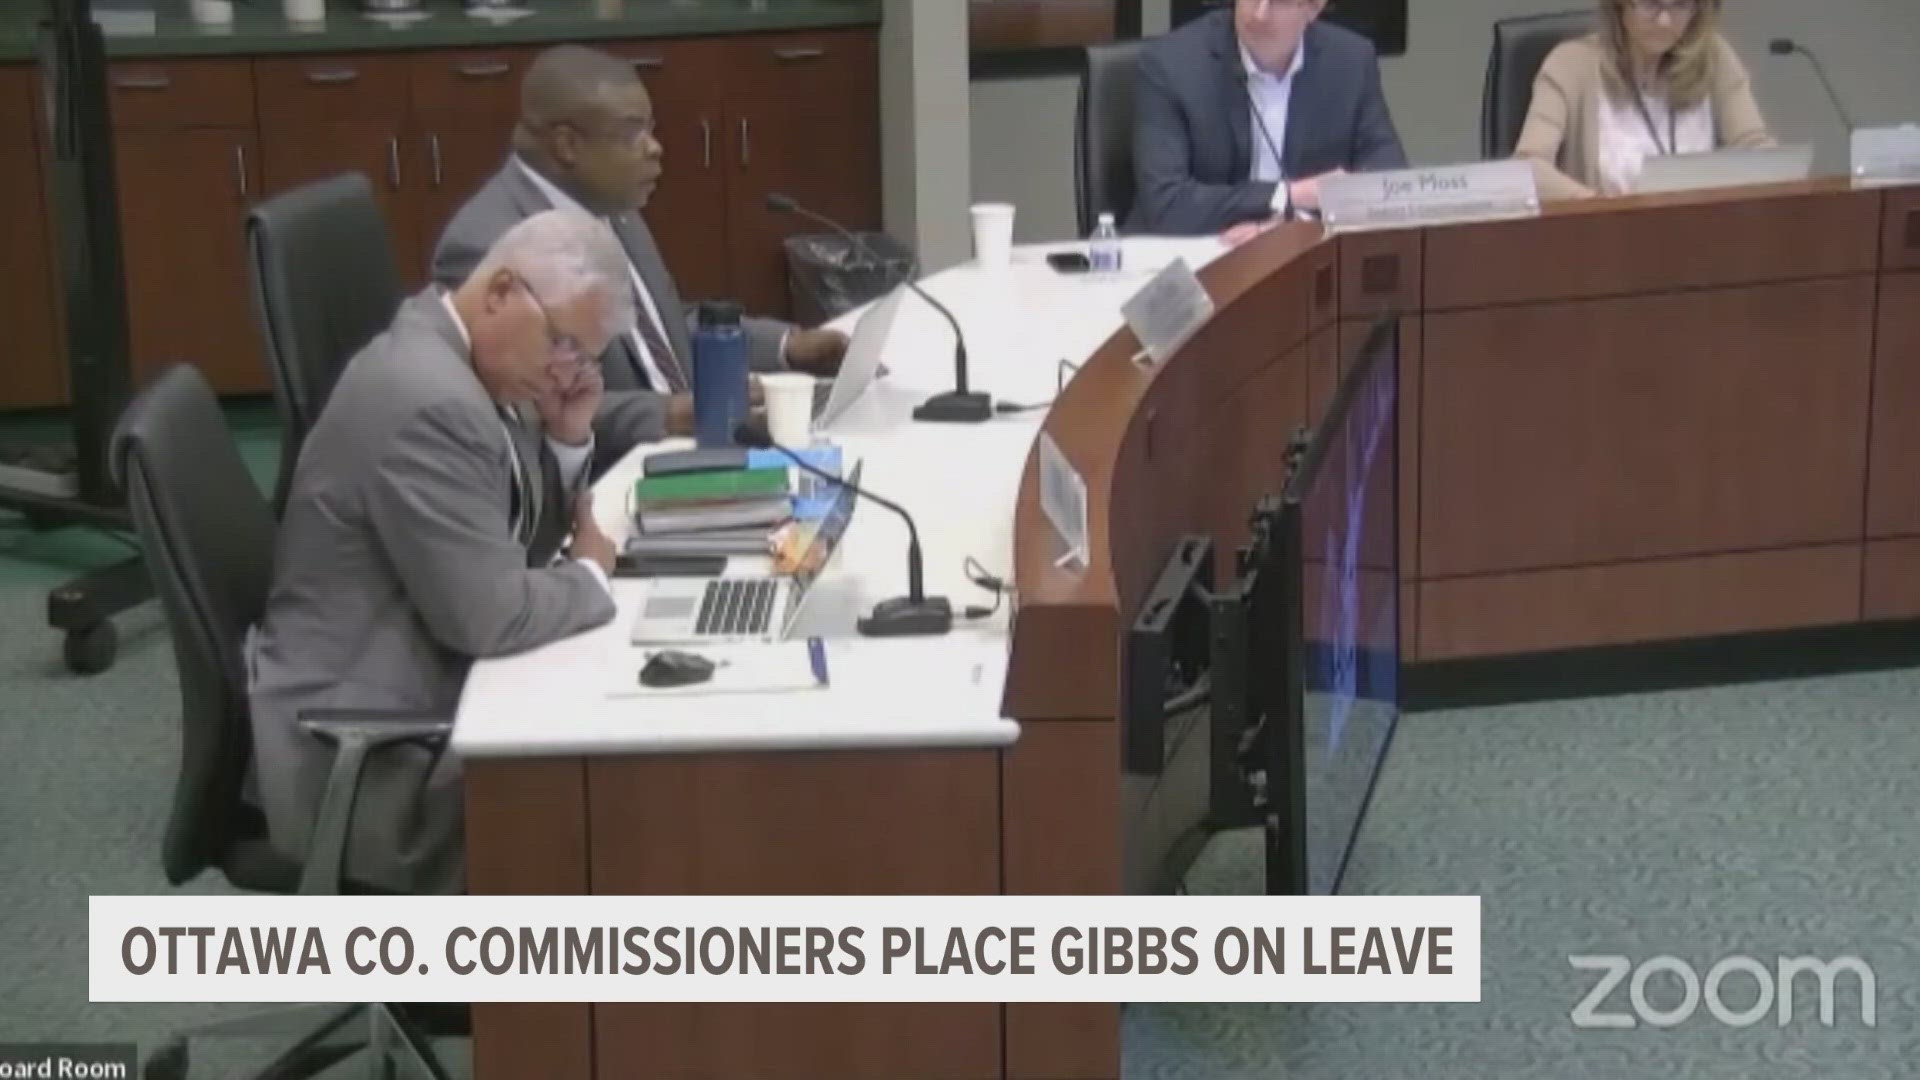 The Ottawa County Commissioners met for a few hours Thursday in a closed session while they considered Gibbs' offer to resign.